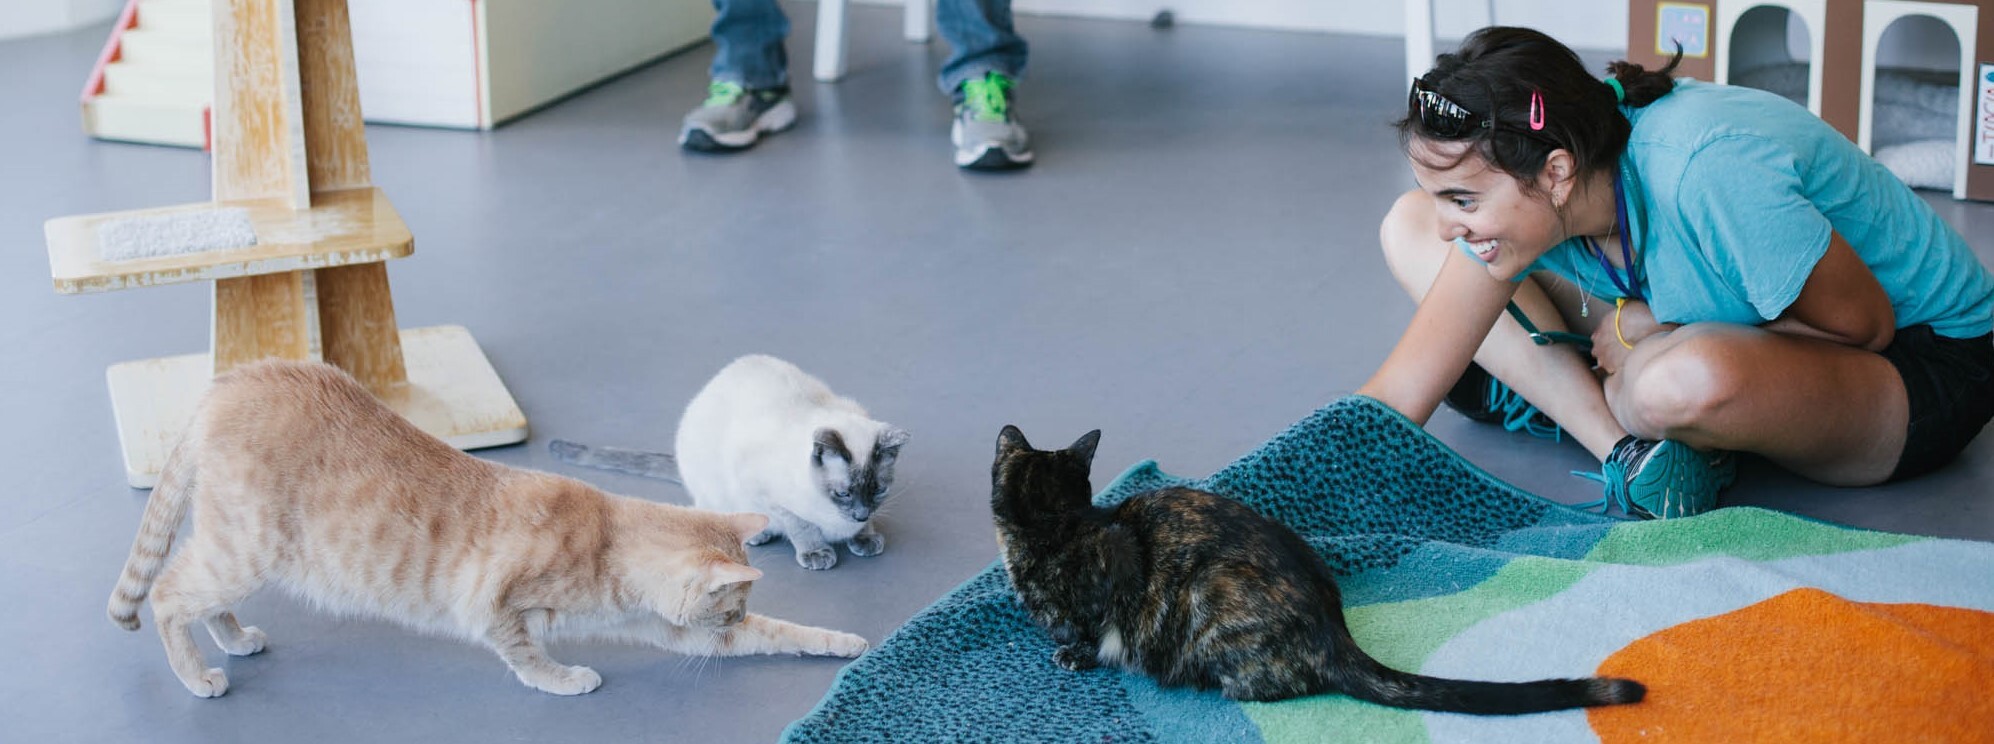 Working with Hard-to-Place Cats at Cat Town